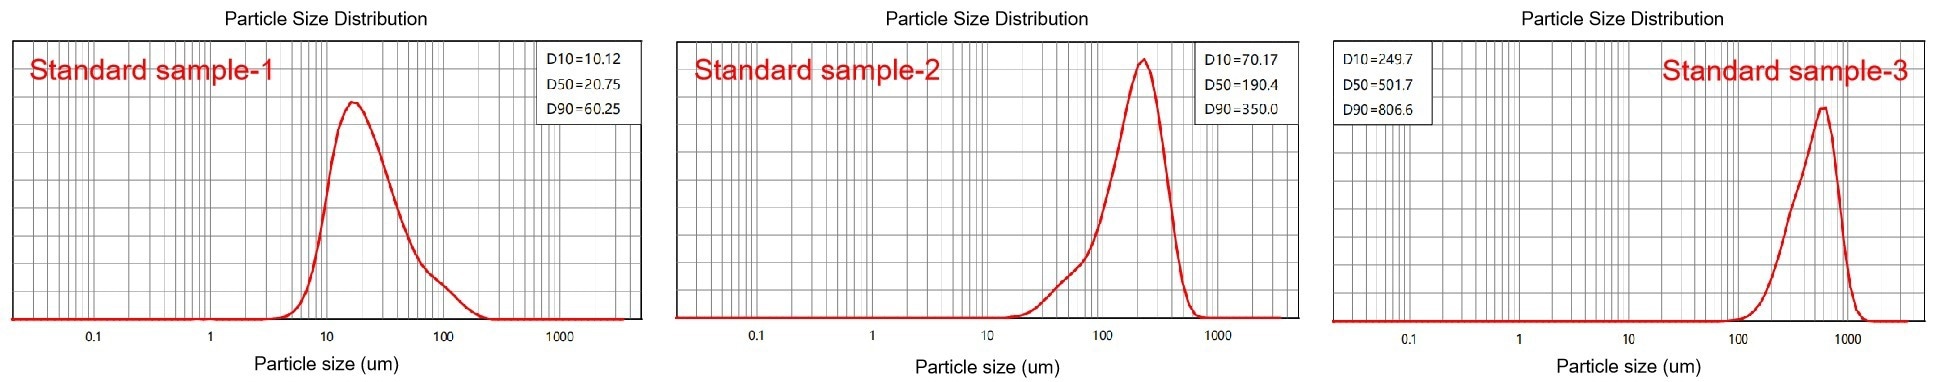 The particle size distributions of specialized standard samples.